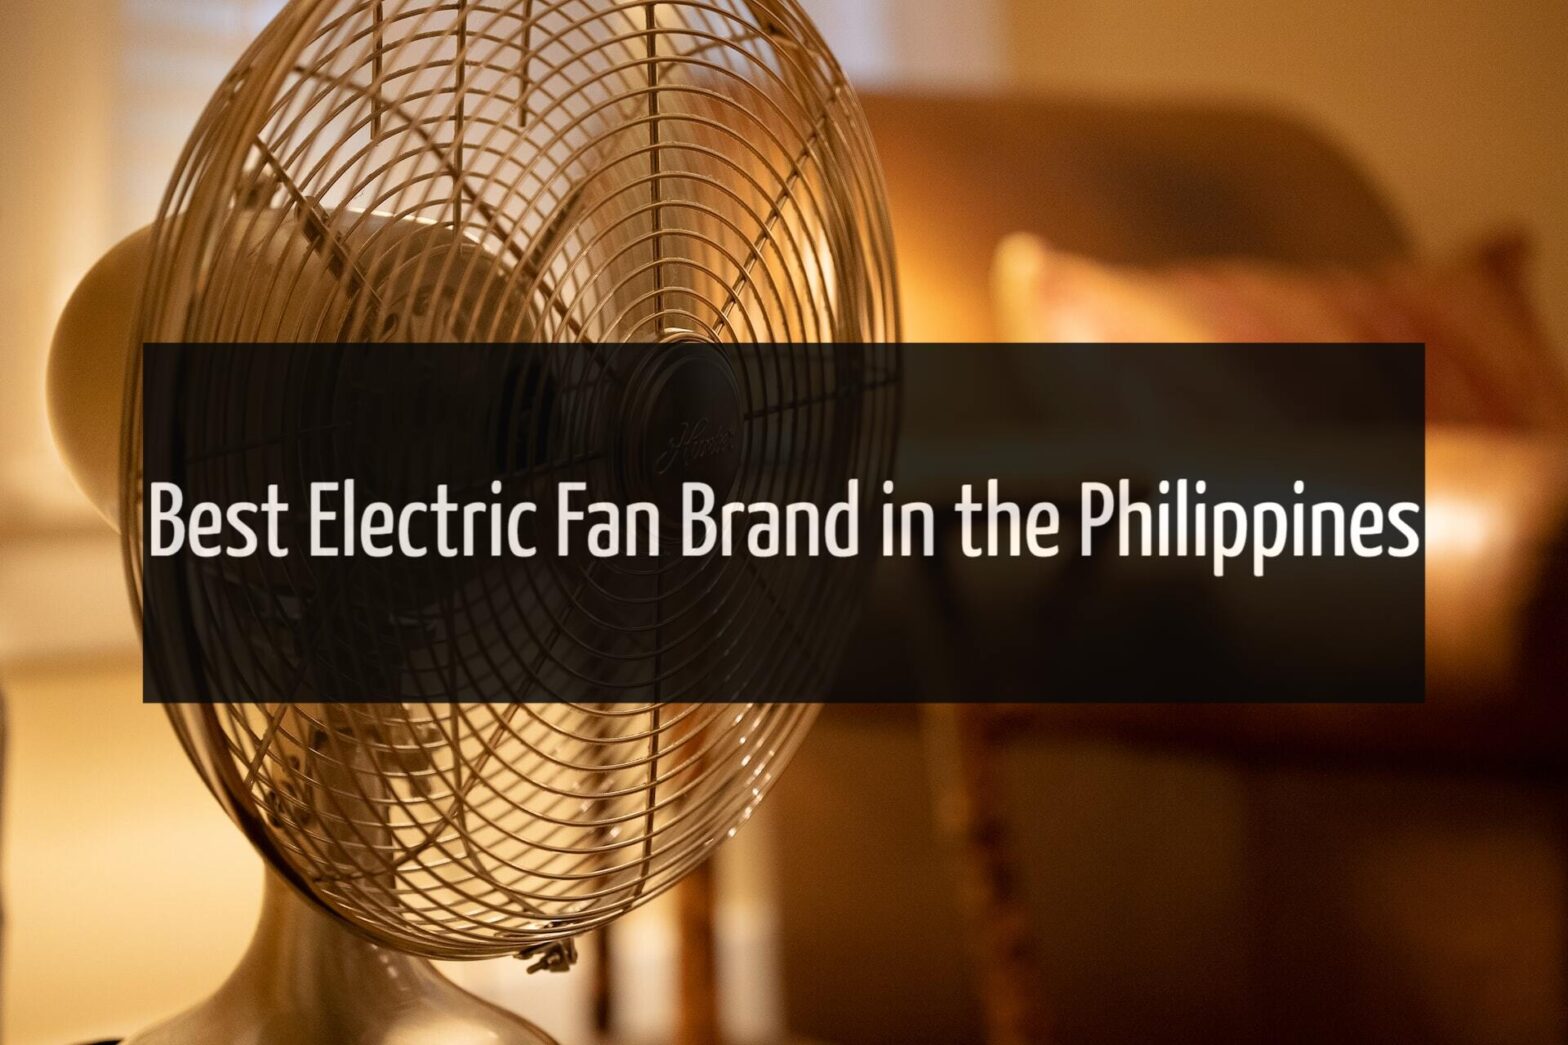 Best Electric Fan Brand in the Philippines